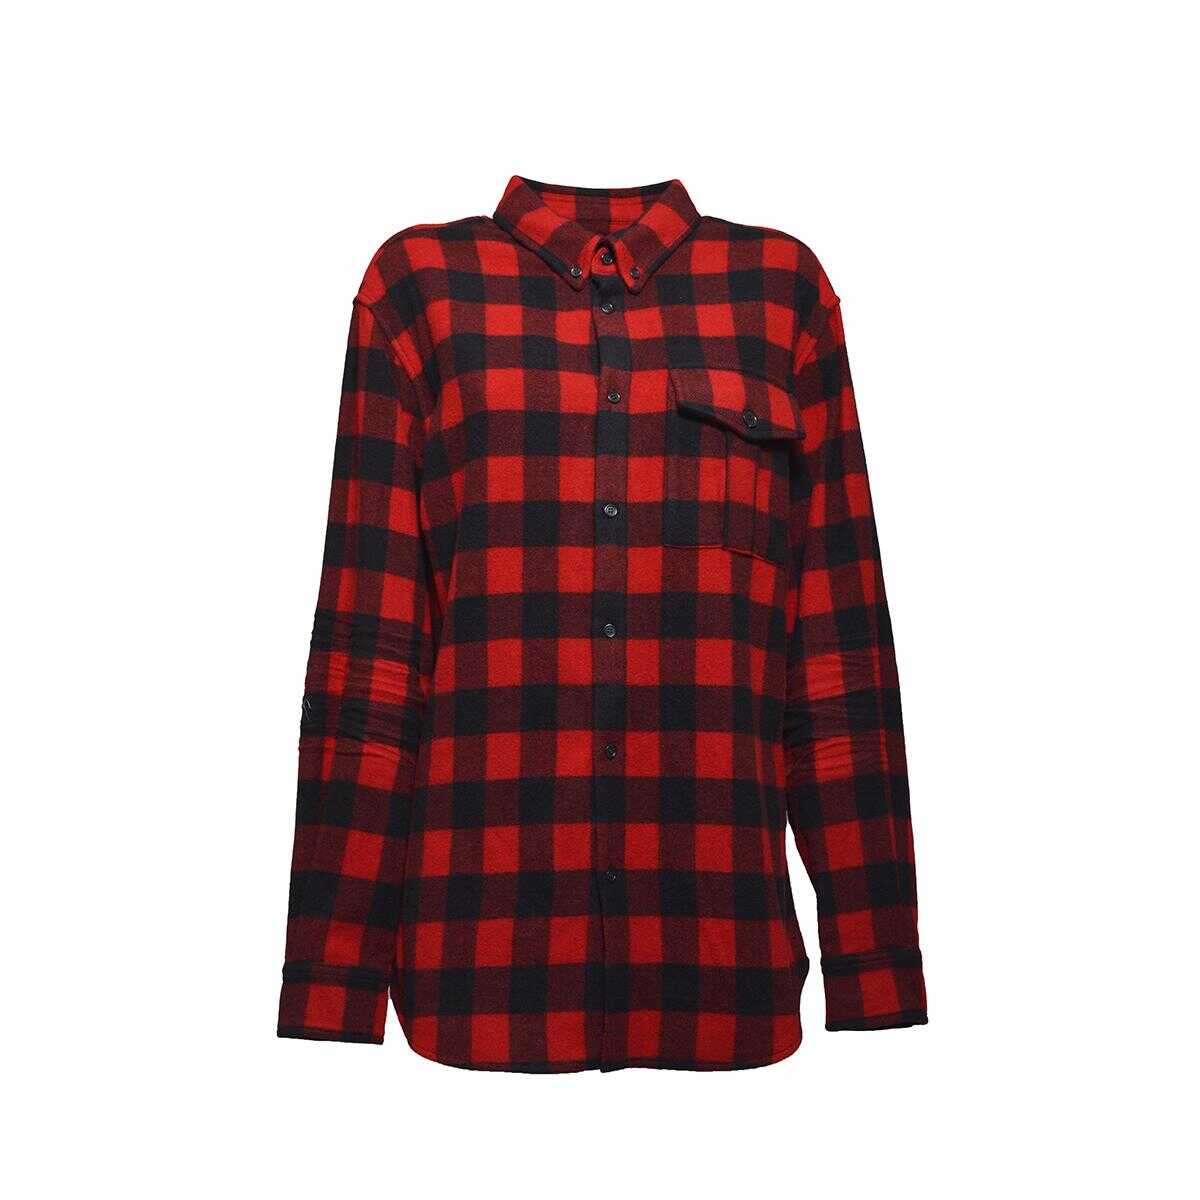 DSQUARED2 DSQUARED2 Red and black wool plaid shirt Dsquared2 ROSSO/NERO